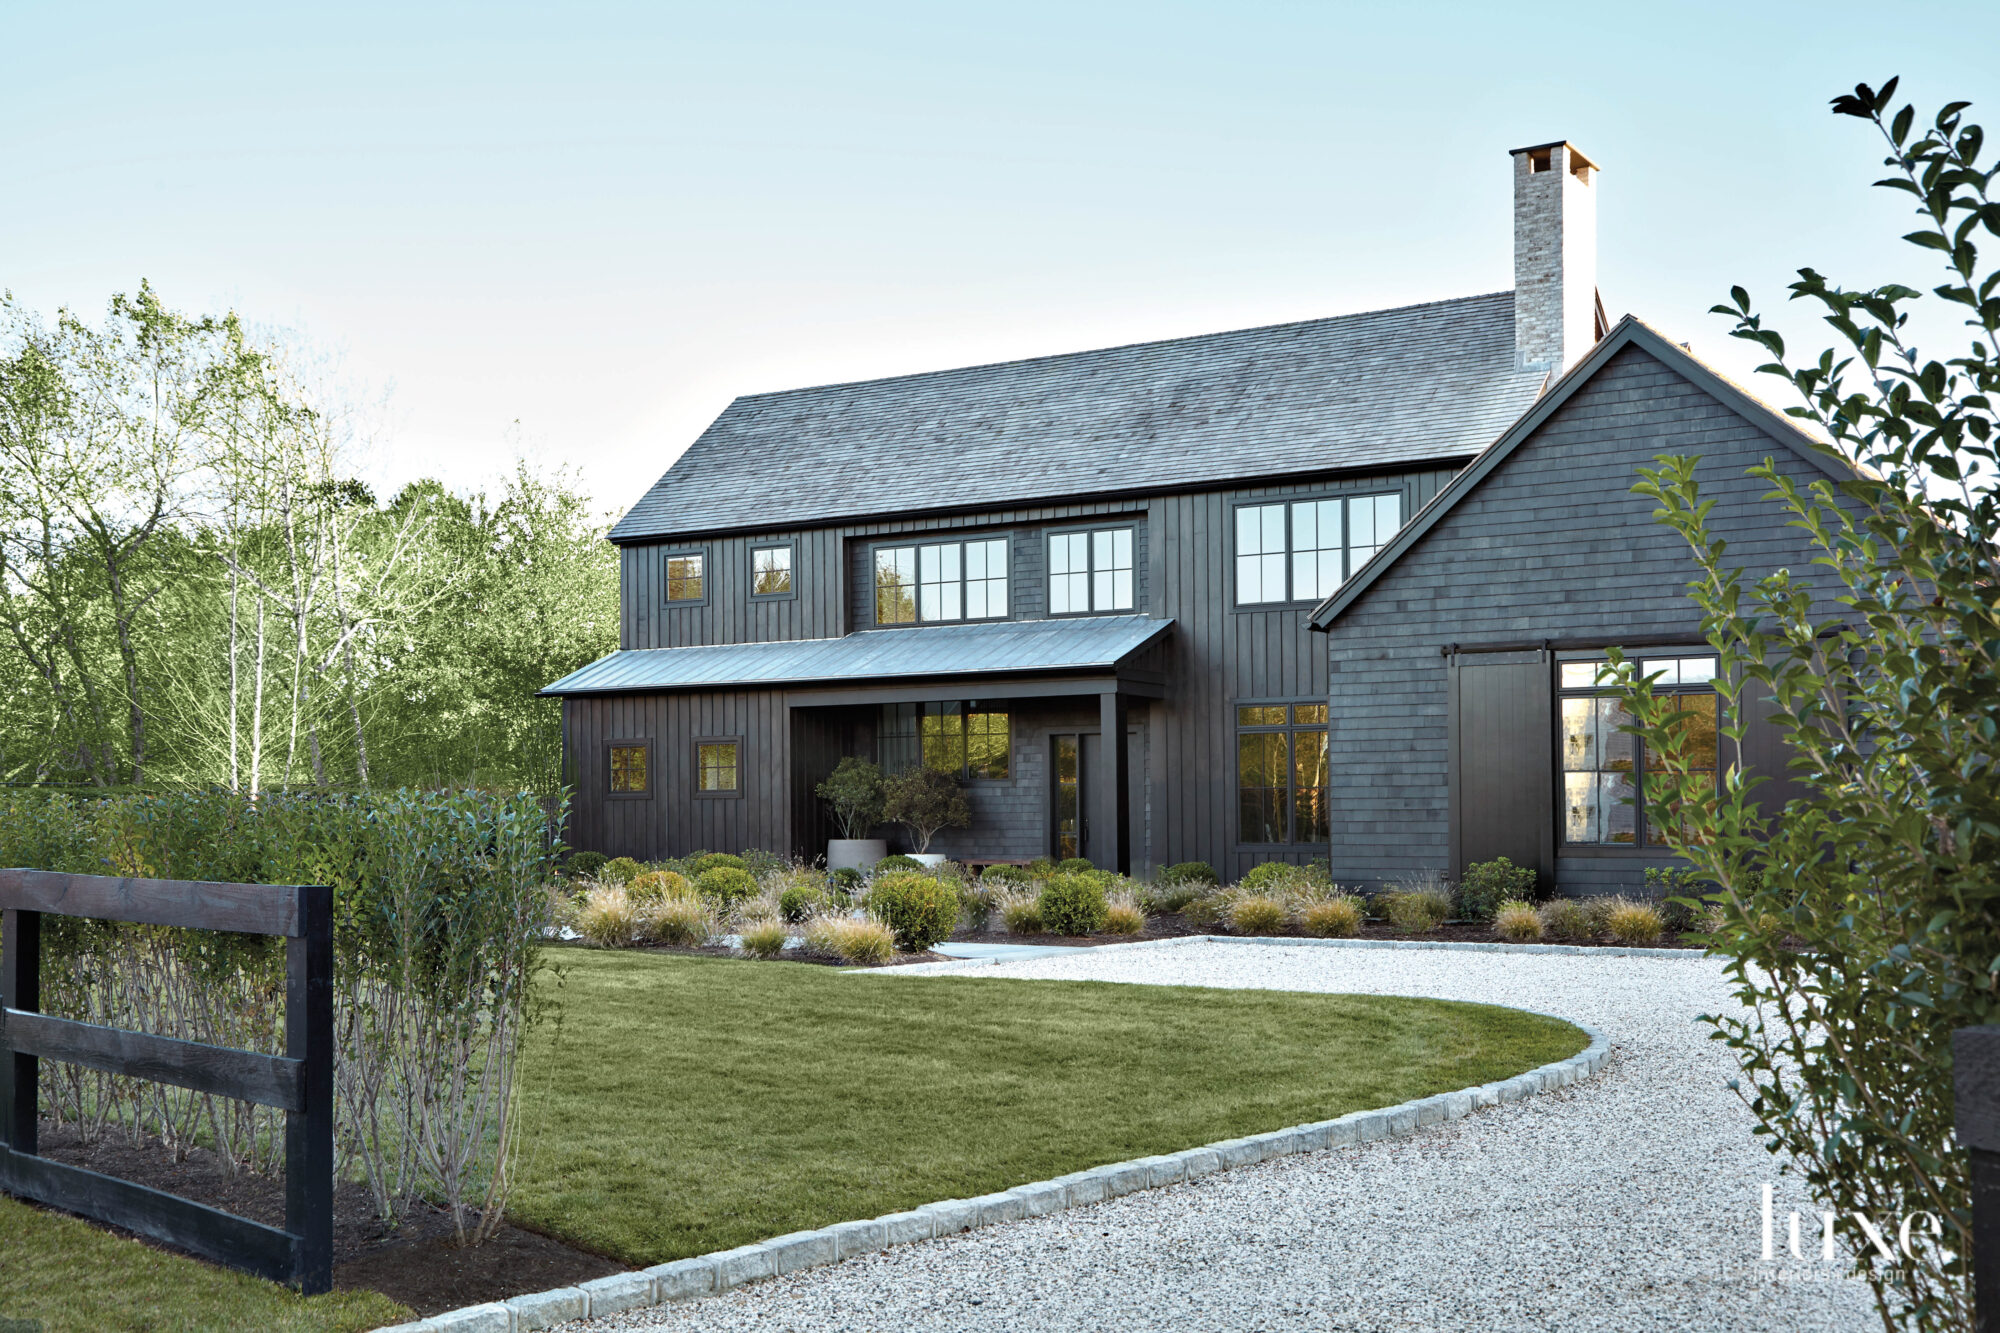 An all-gray exterior defines this Hamptons home